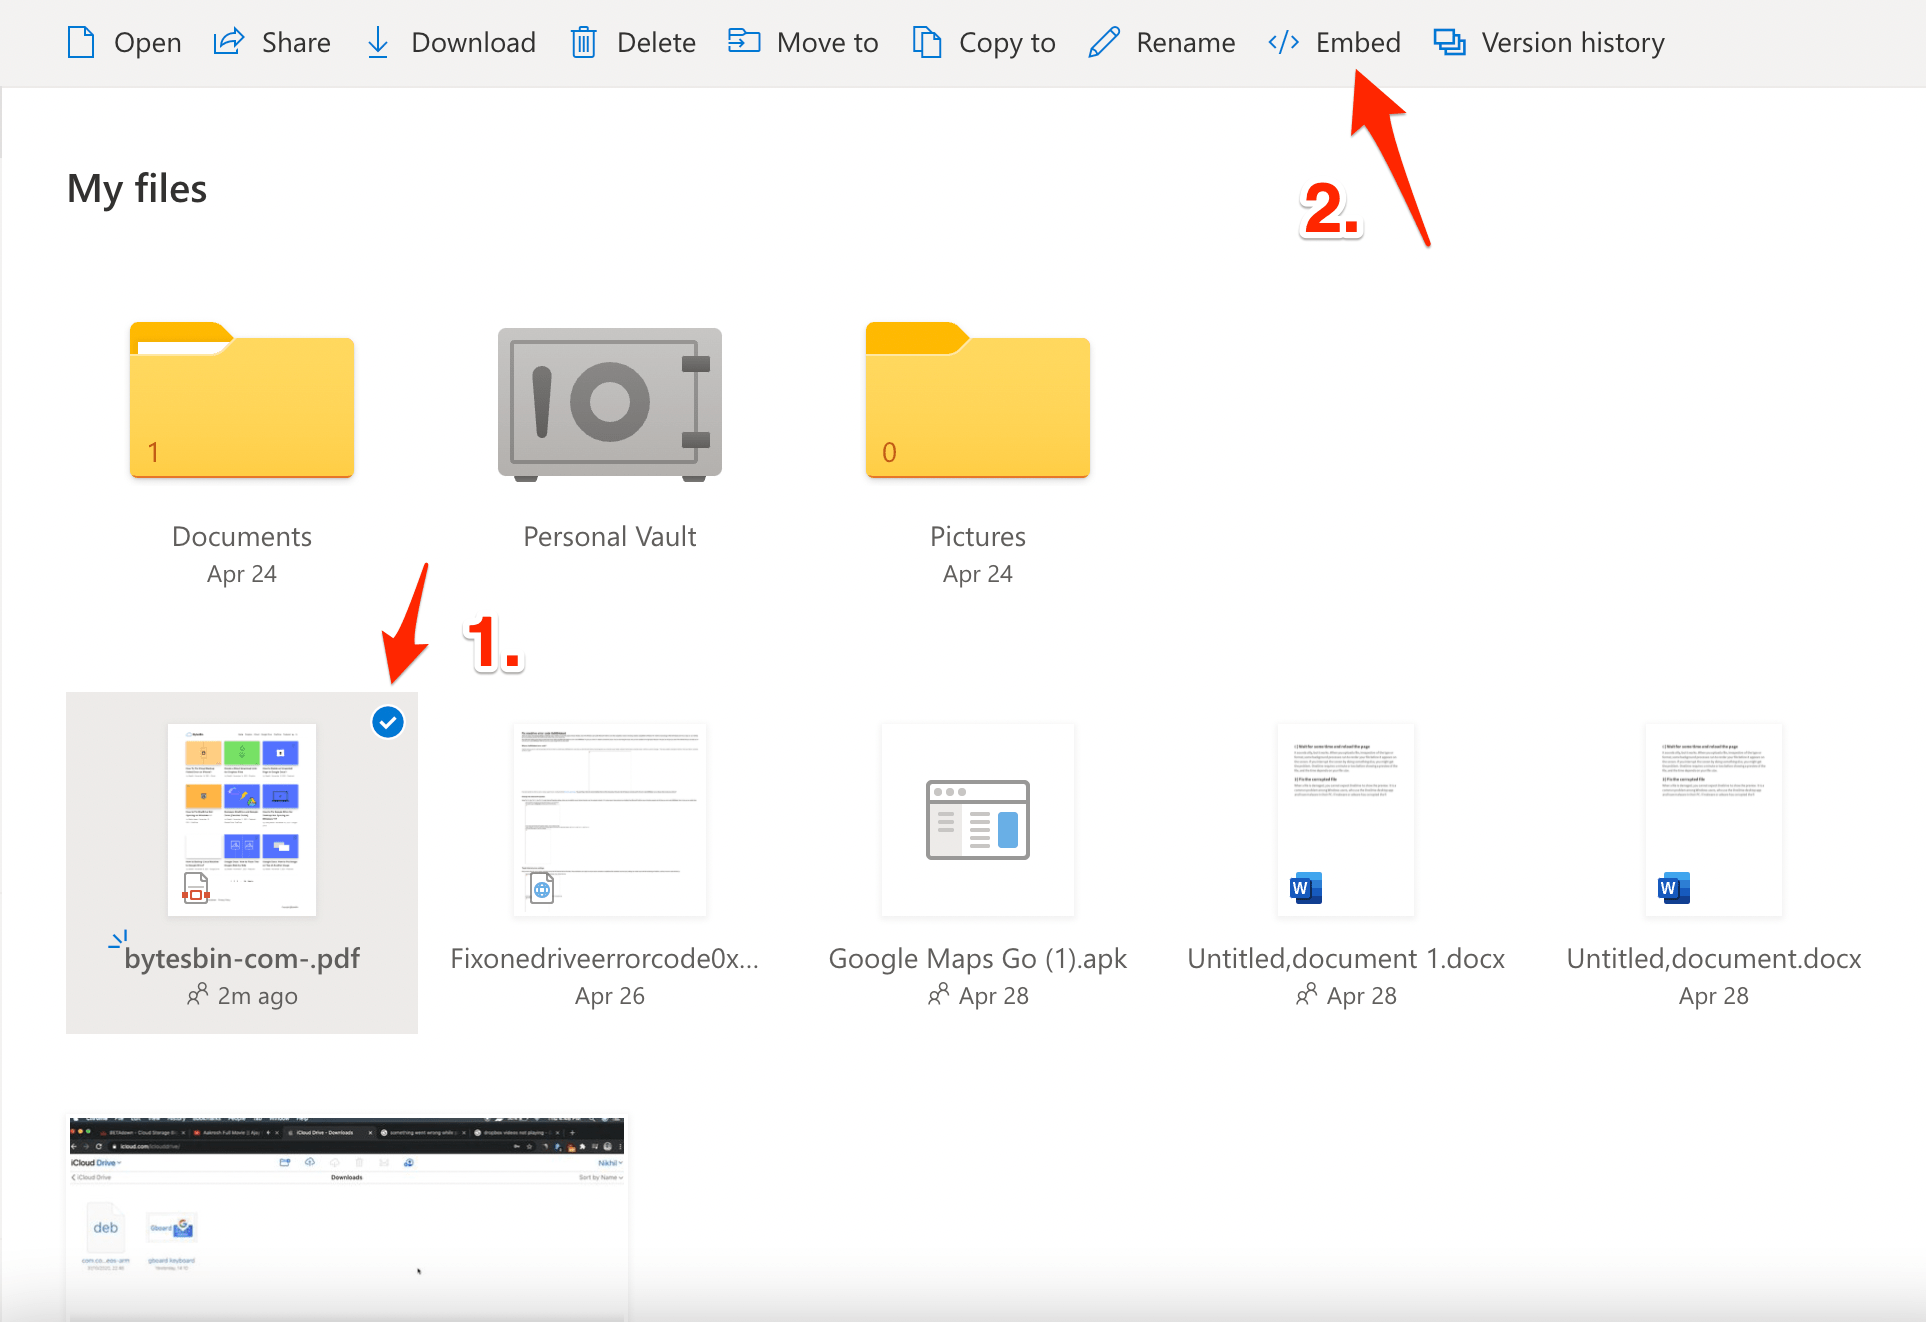 Click on the Embed button for the selected file